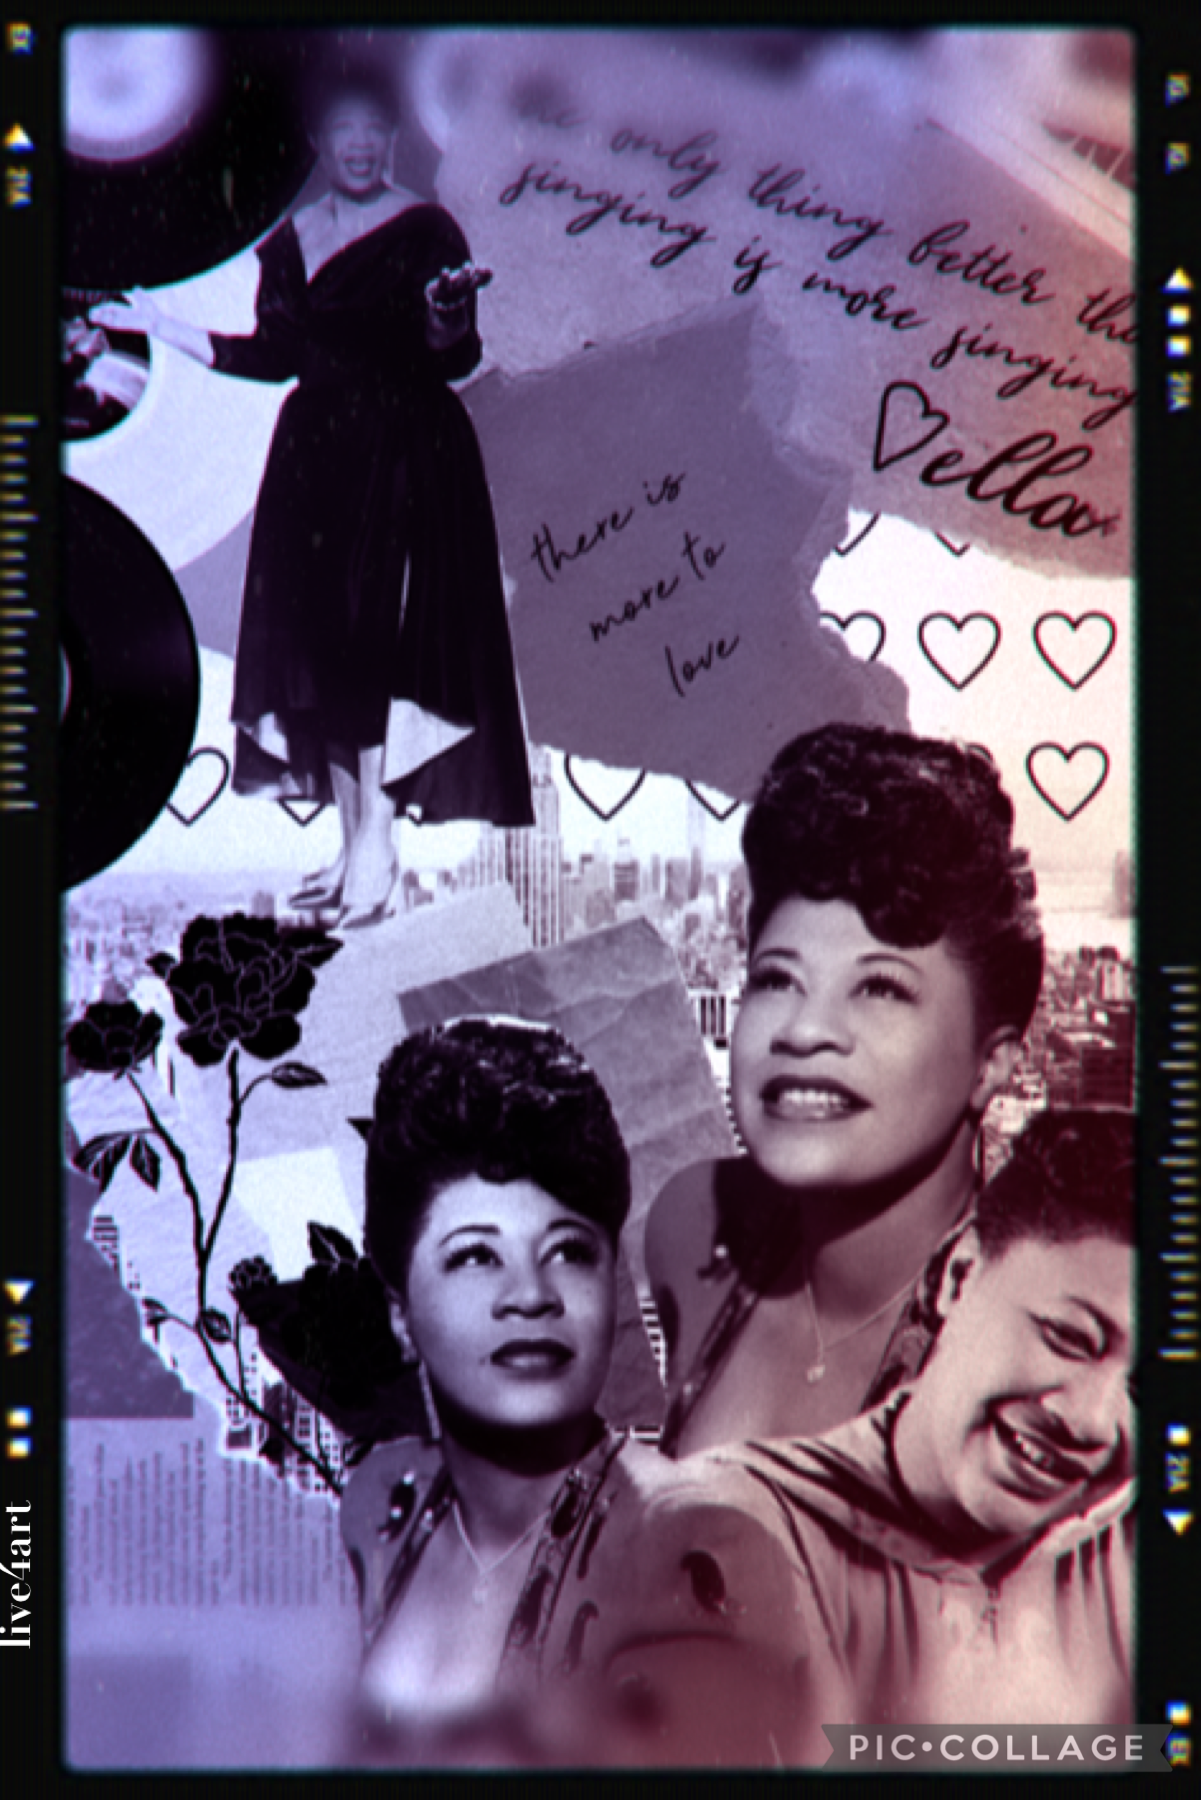 2.26.21 tap
ft Ella Fitzgerald for black history month! it may almost be over but make sure to check -ocean-aesthetics- account for the final collage on the 28th! check remixes for a fact file!
q: if you could go back to a decade, which would you choose?
